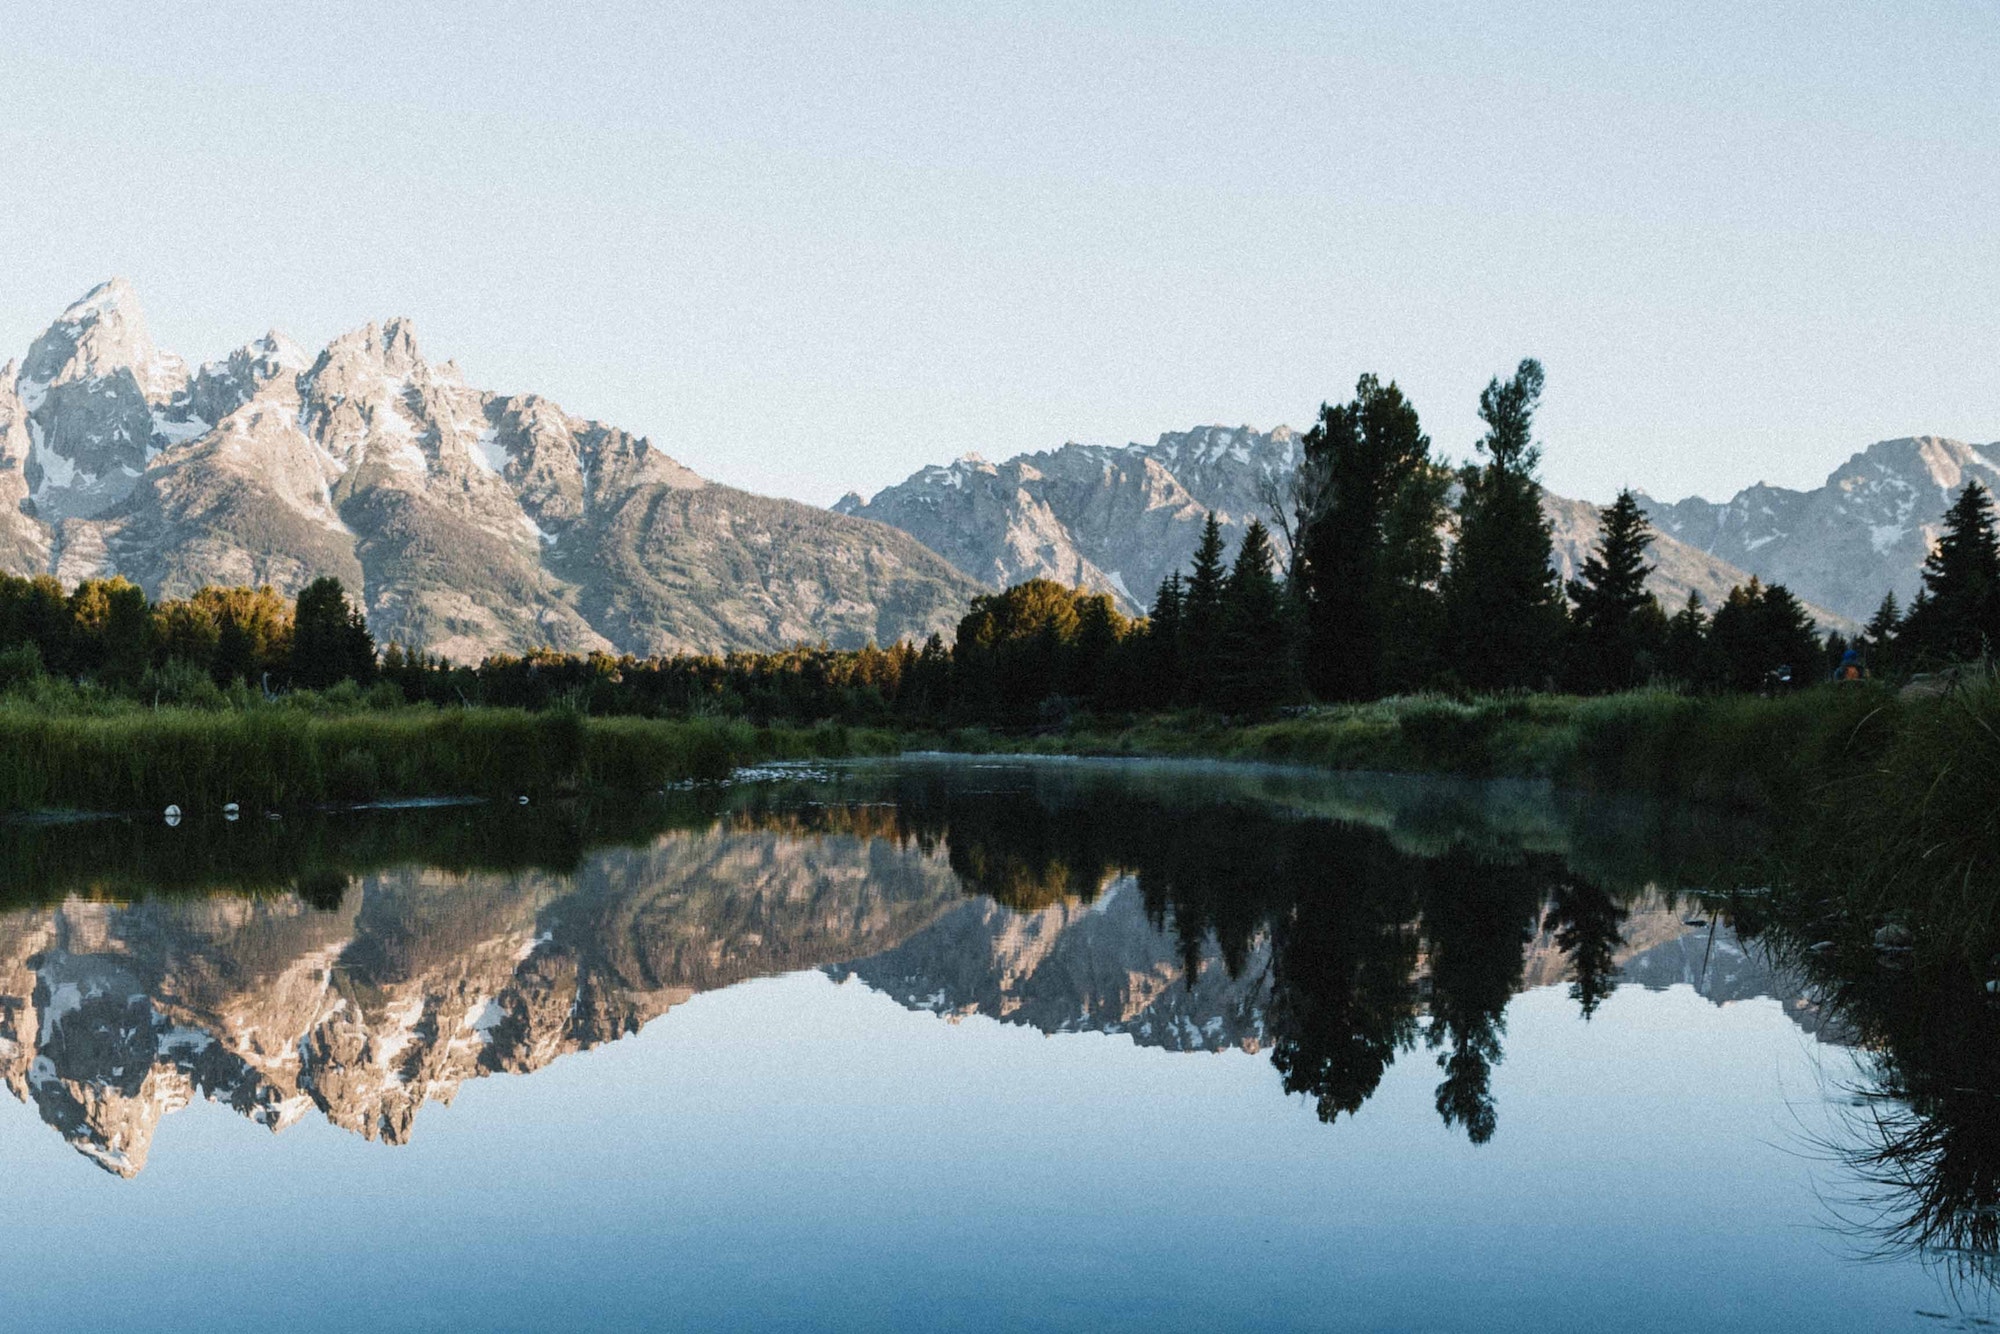 A perfect reflection of the Tetons at sunrise.